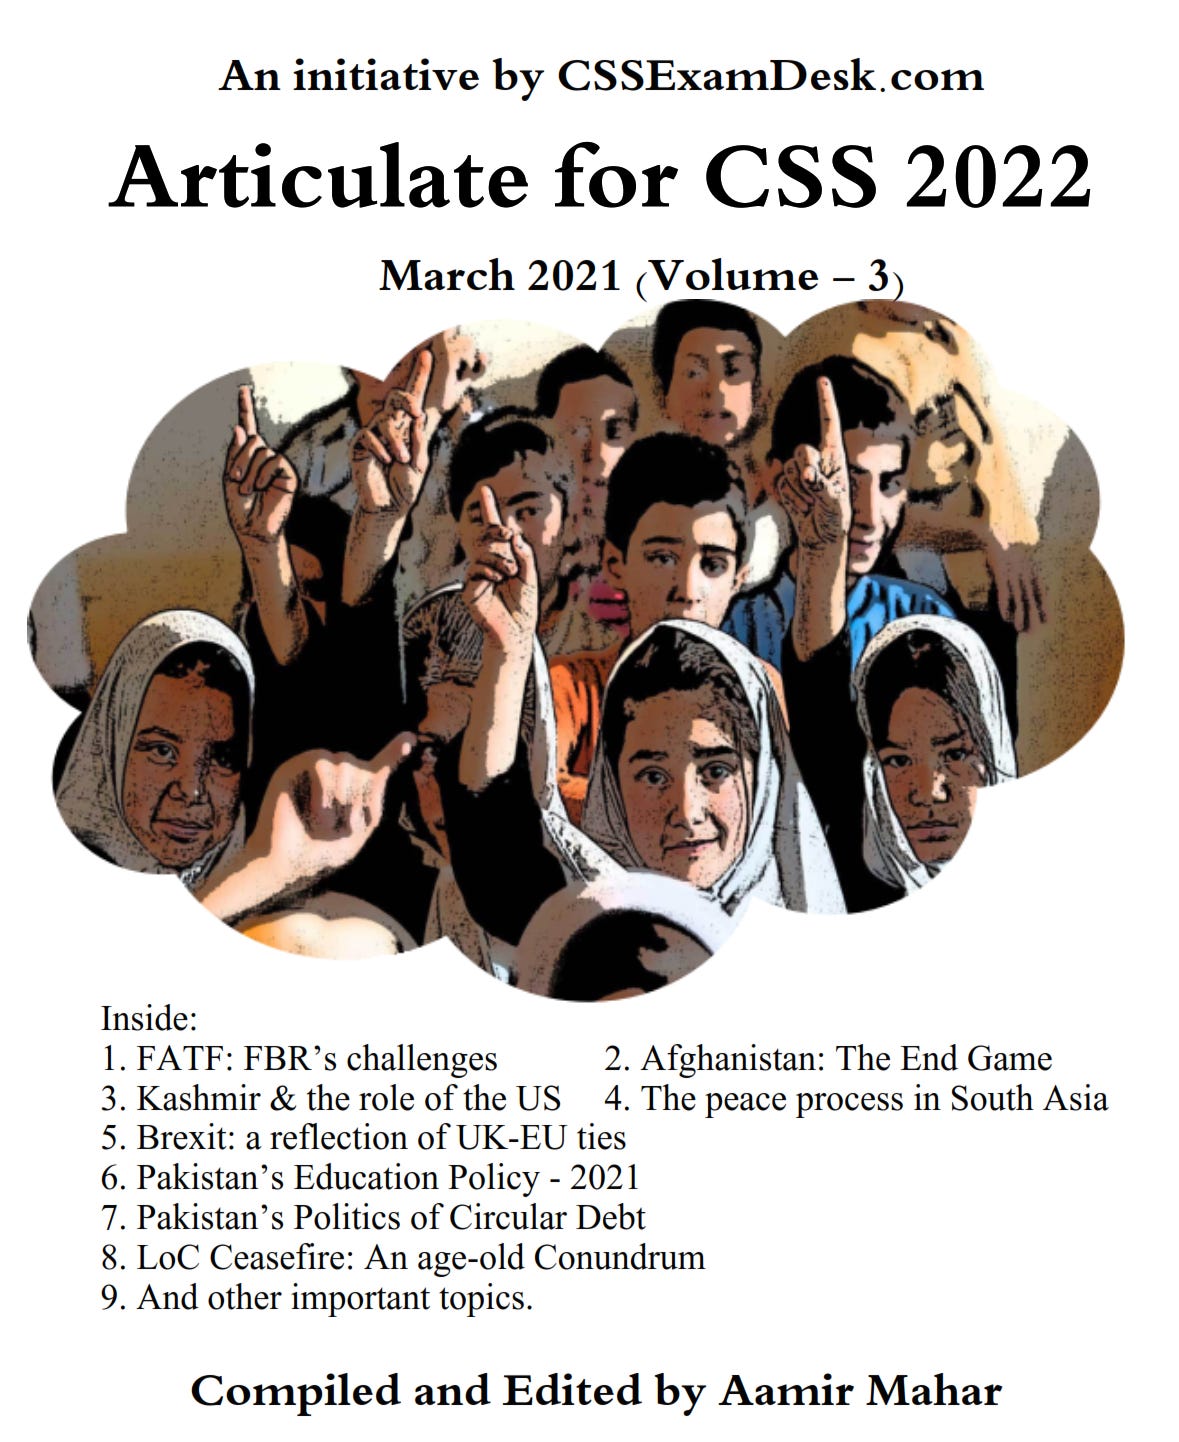 Rapid CSS 2022 17.7.0.248 download the new version for ipod